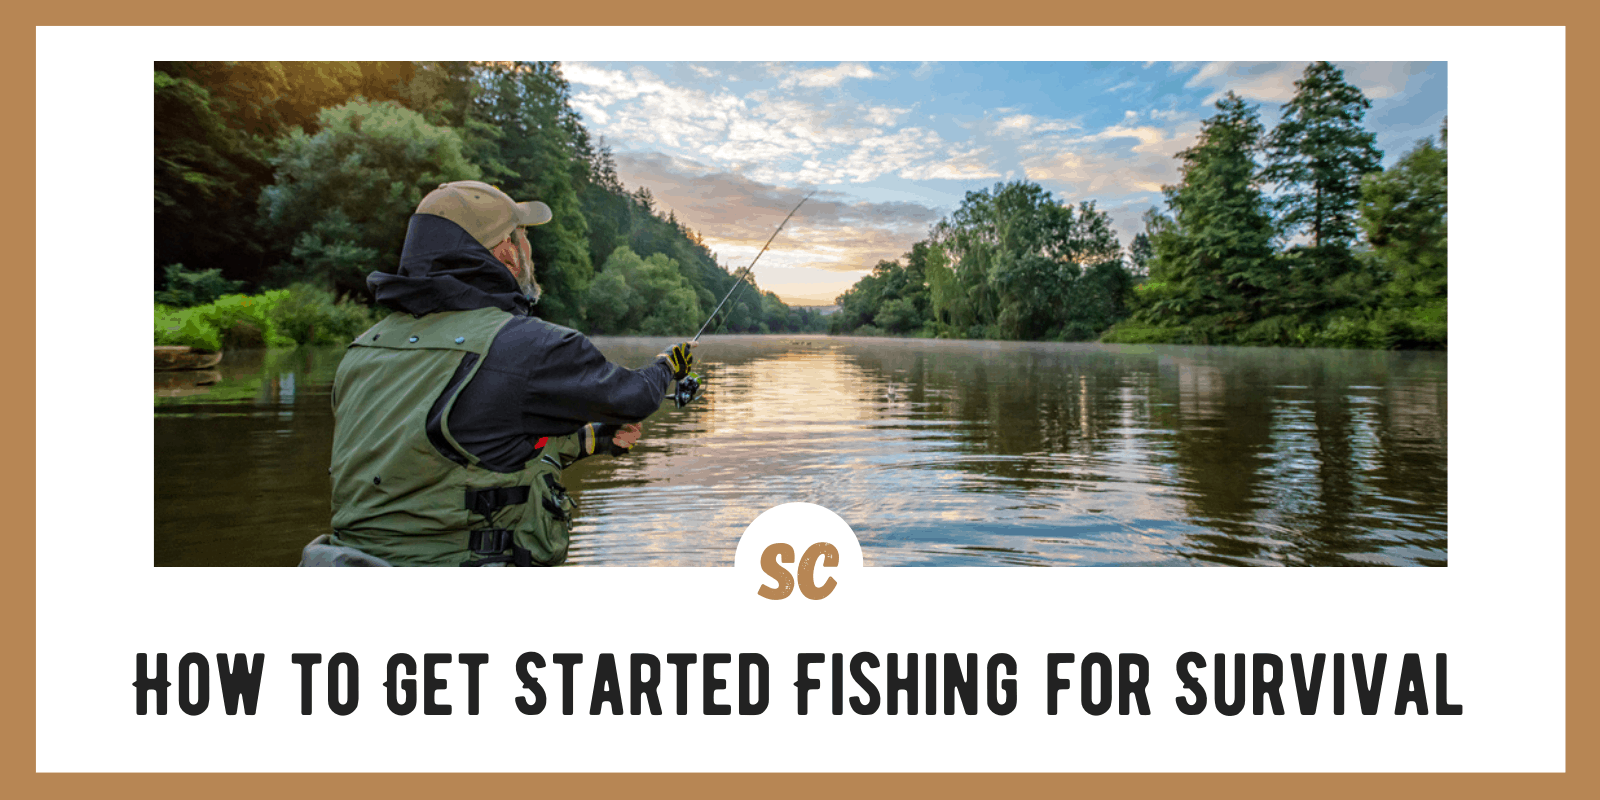 Fishing Basics 101: How to Get Started Fishing for Survival